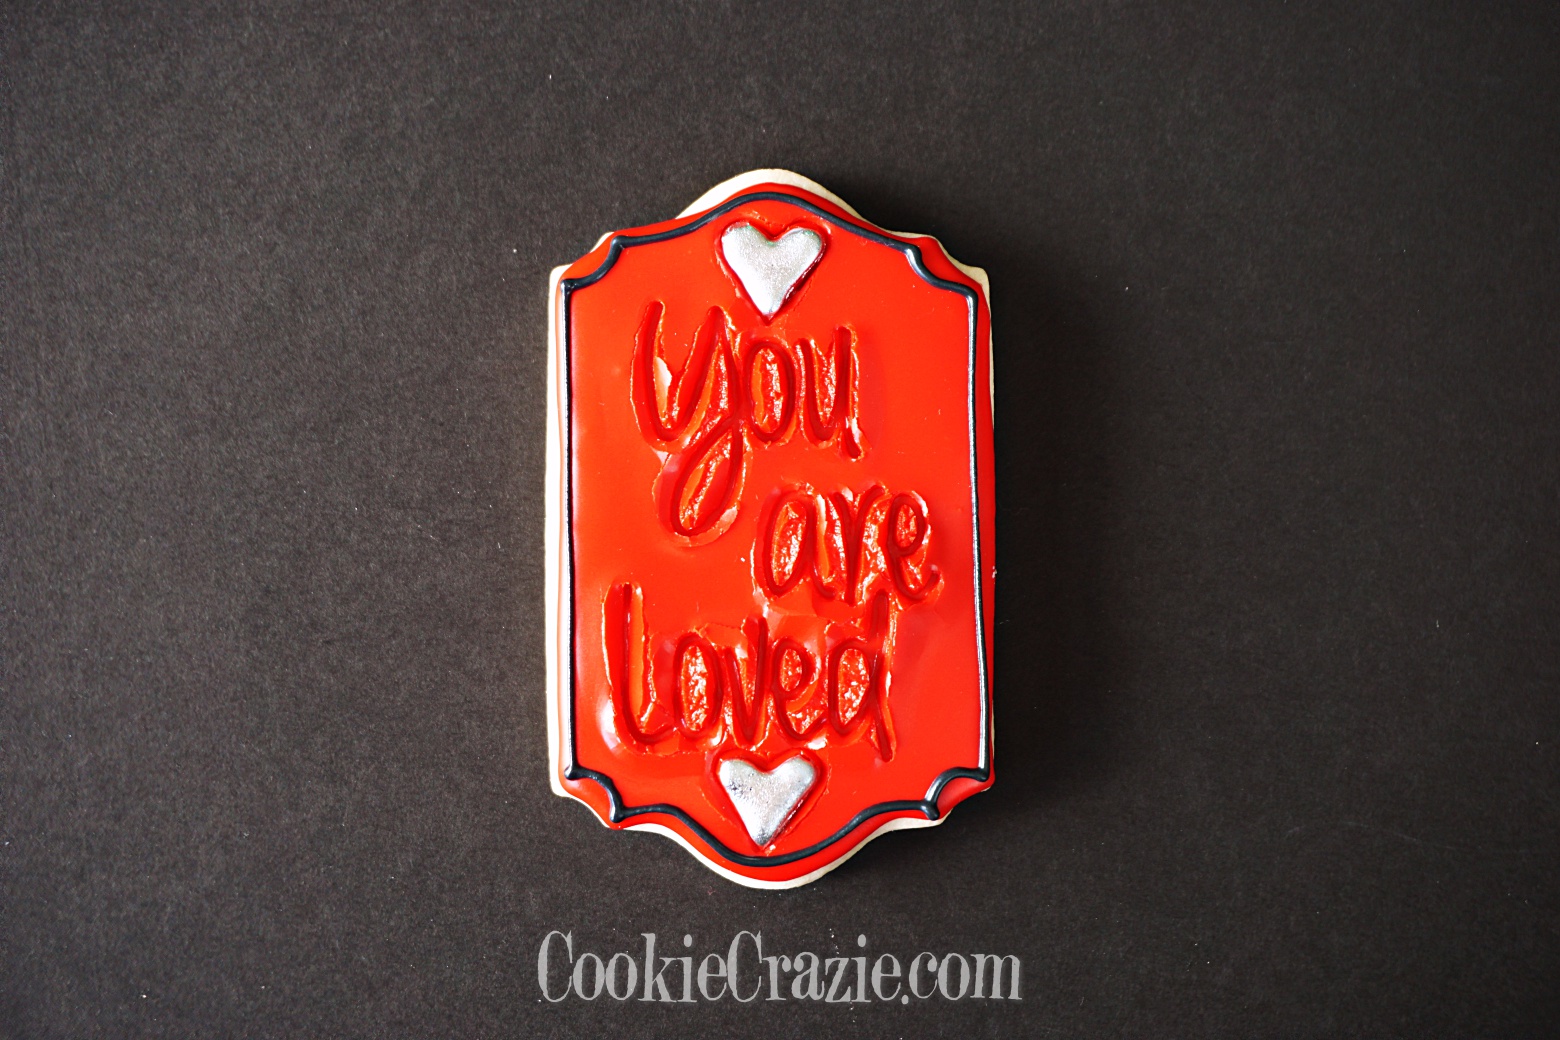  You Are Loved Plaque Decorated Sugar Cookie YouTube video  HERE  